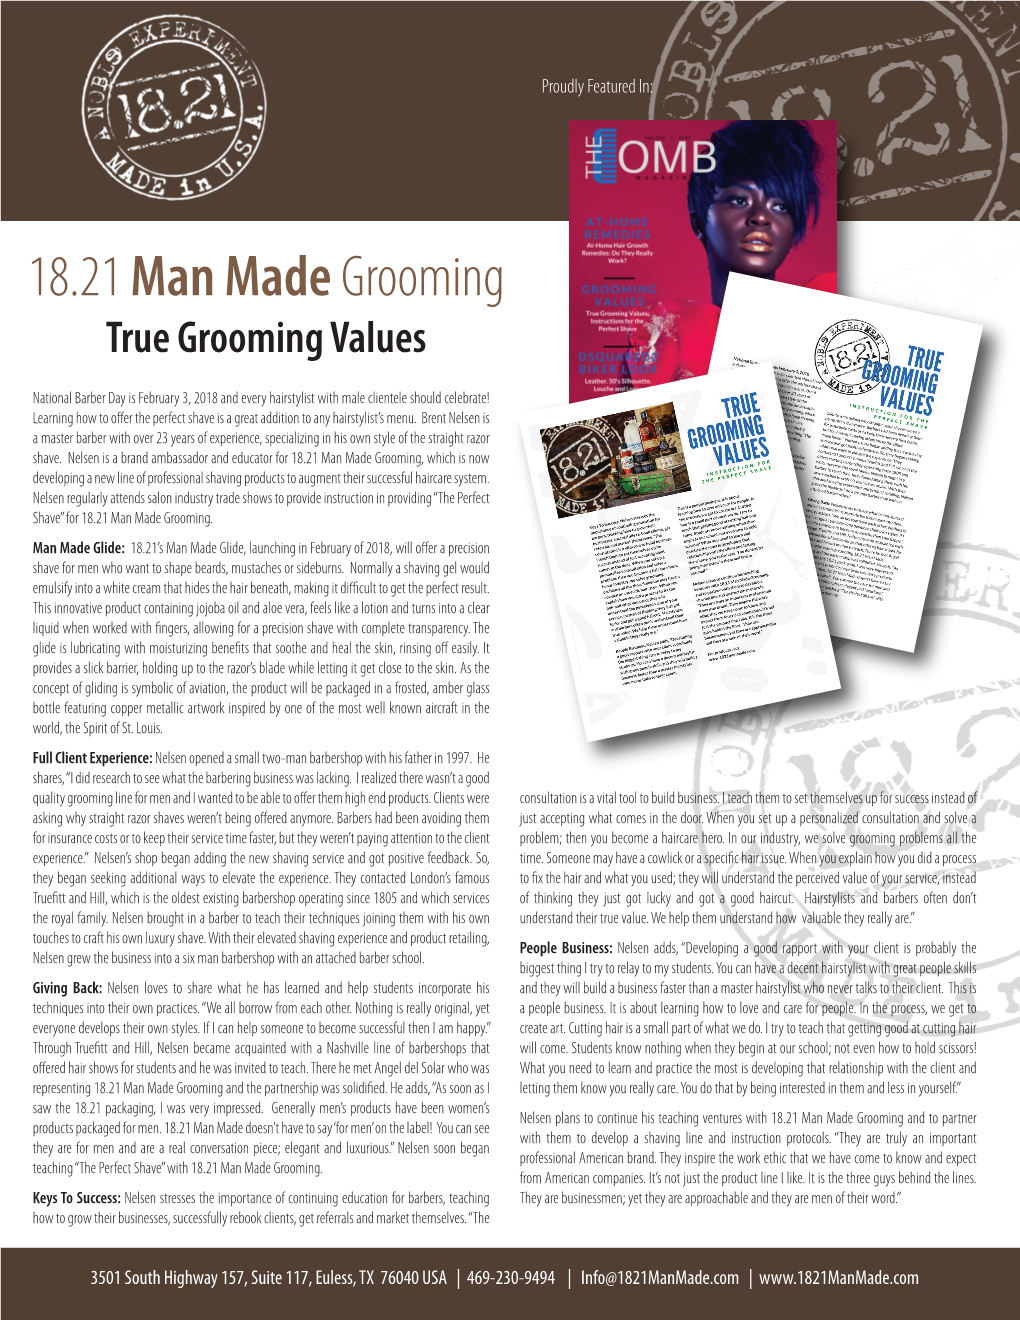 PRR 18.21 Man Made Grooming